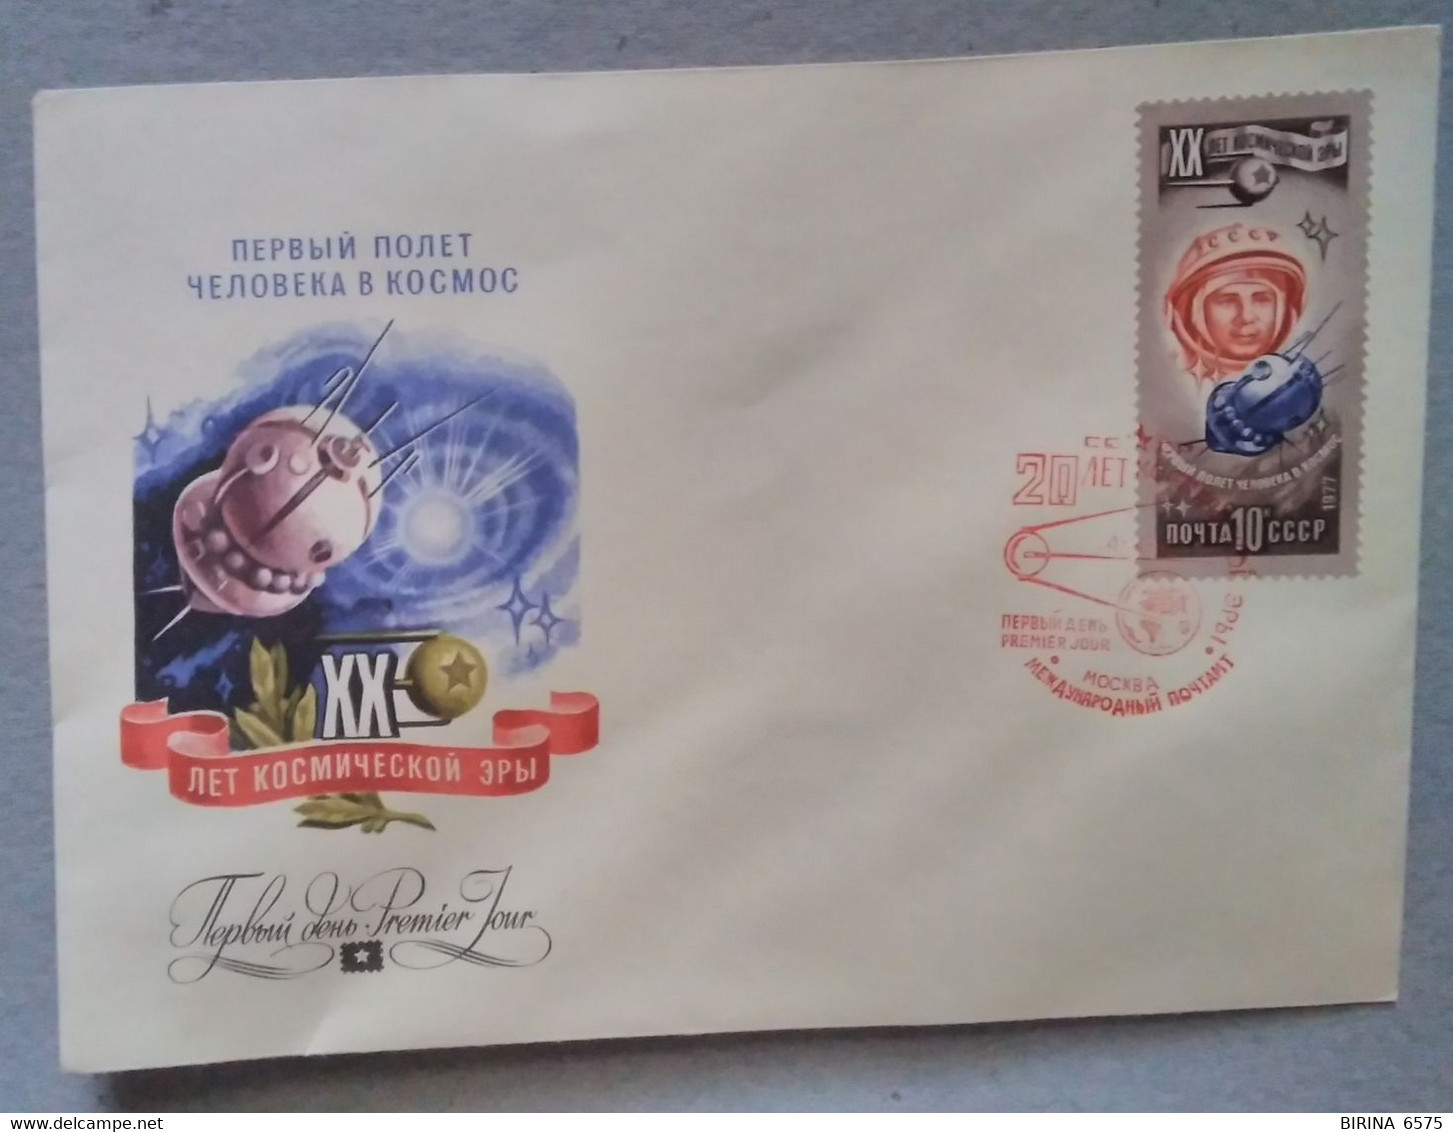 Astronautics. Cosmos. First Day. 1977. Stamp. Postal Envelope. Special Cancellation. ХХ Years Of The Space Age The USSR. - Colecciones